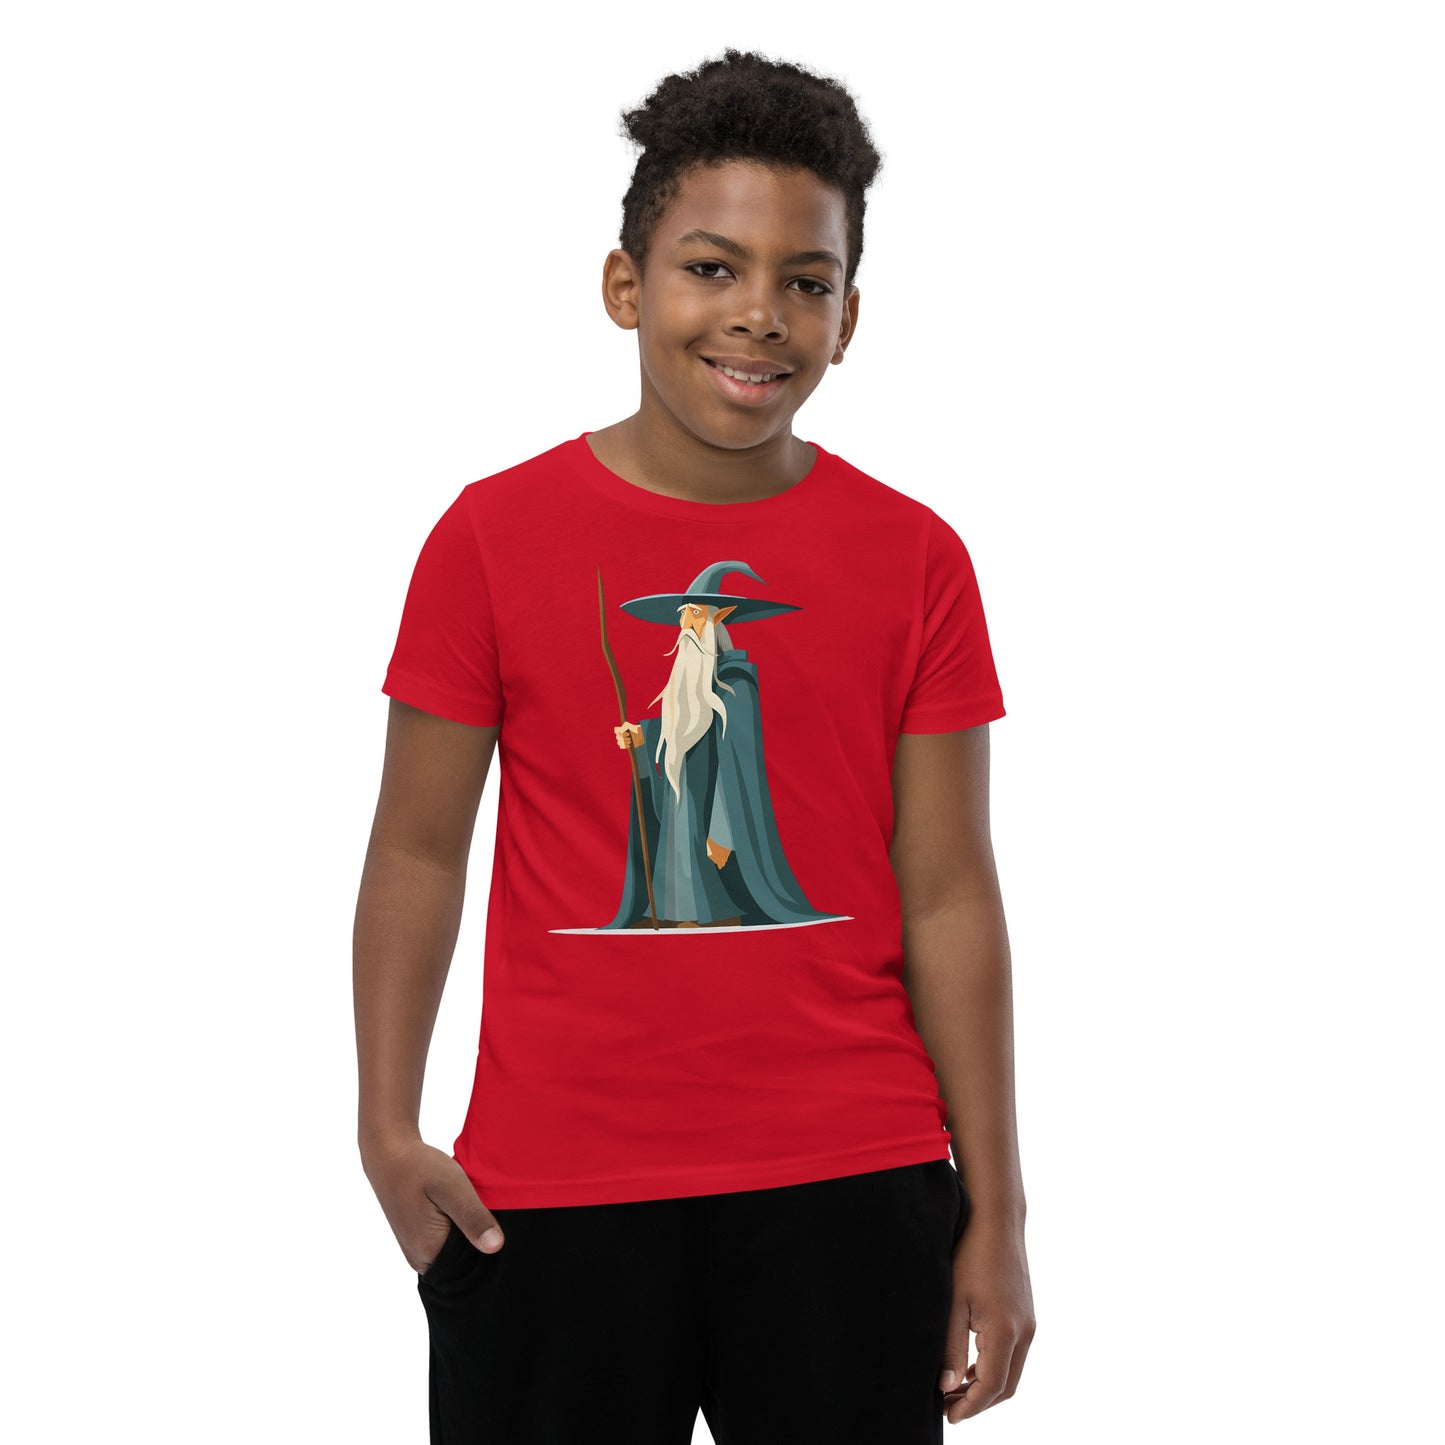 Boy with a red T-shirt with a picture of a magician